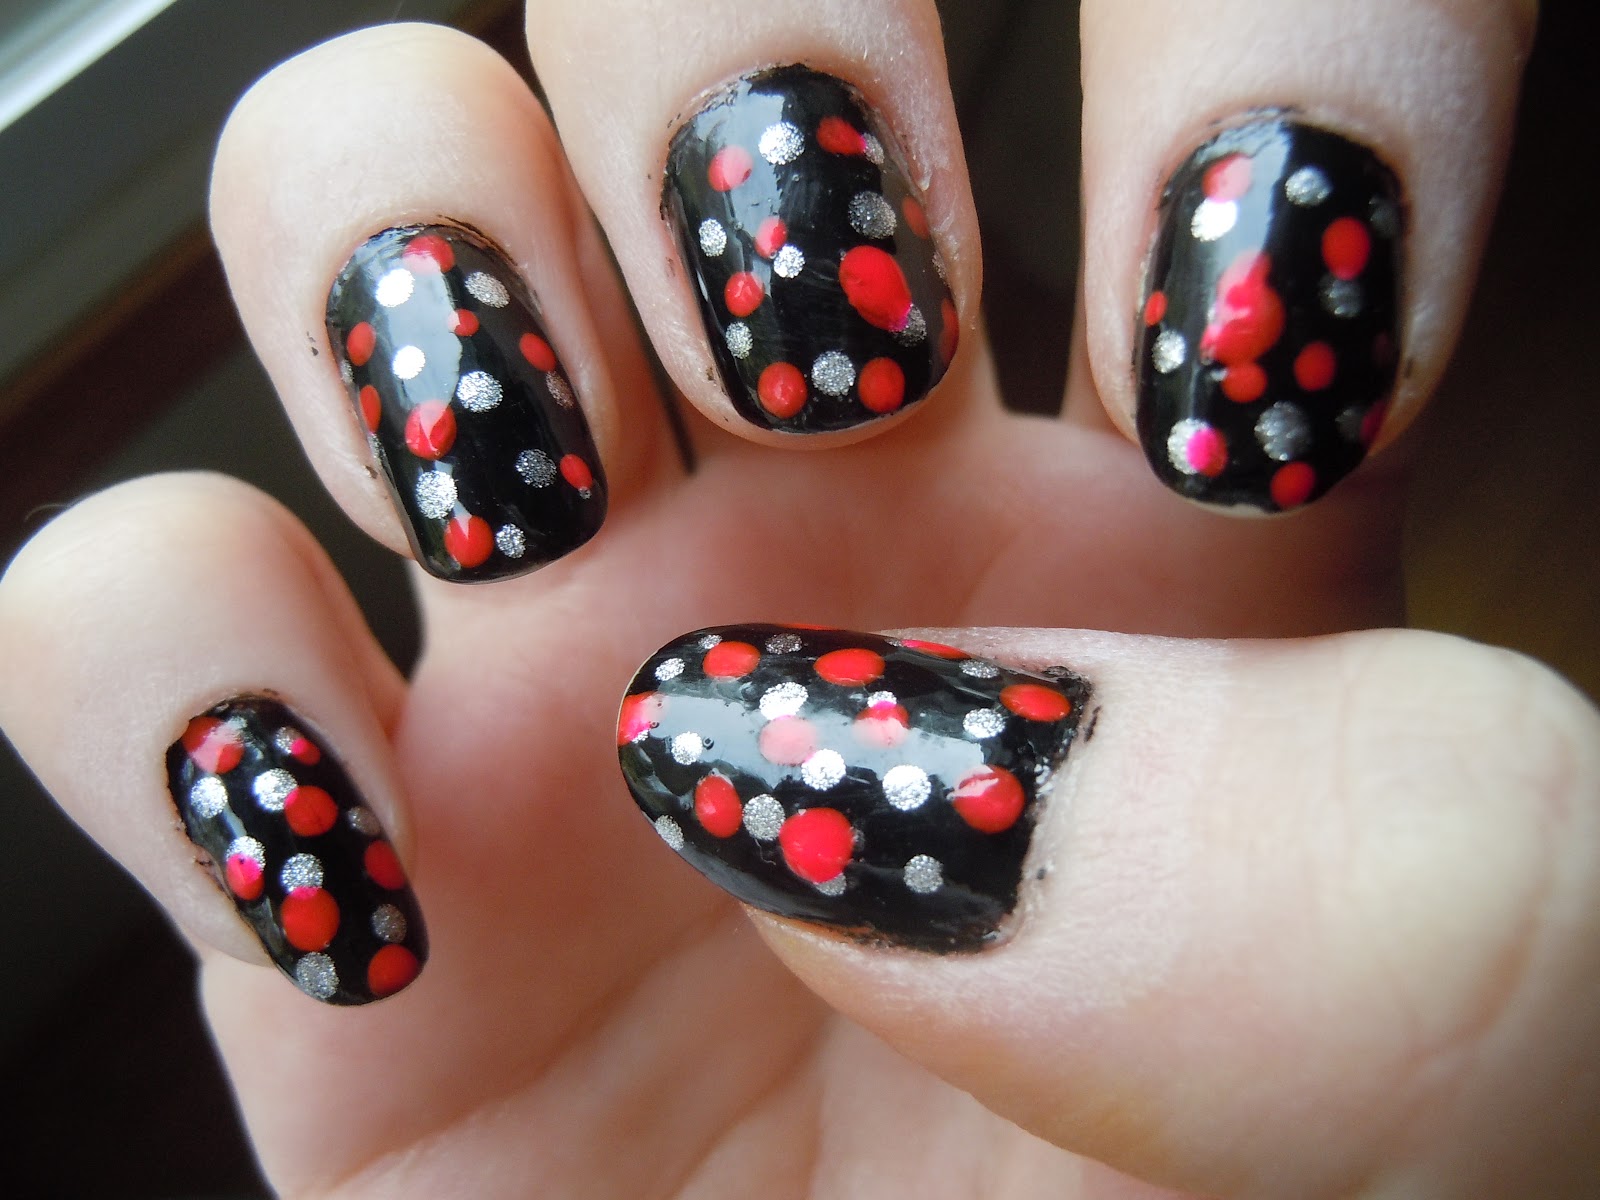 9. Paddle Pop Nail Art with Dotting Tool - wide 3